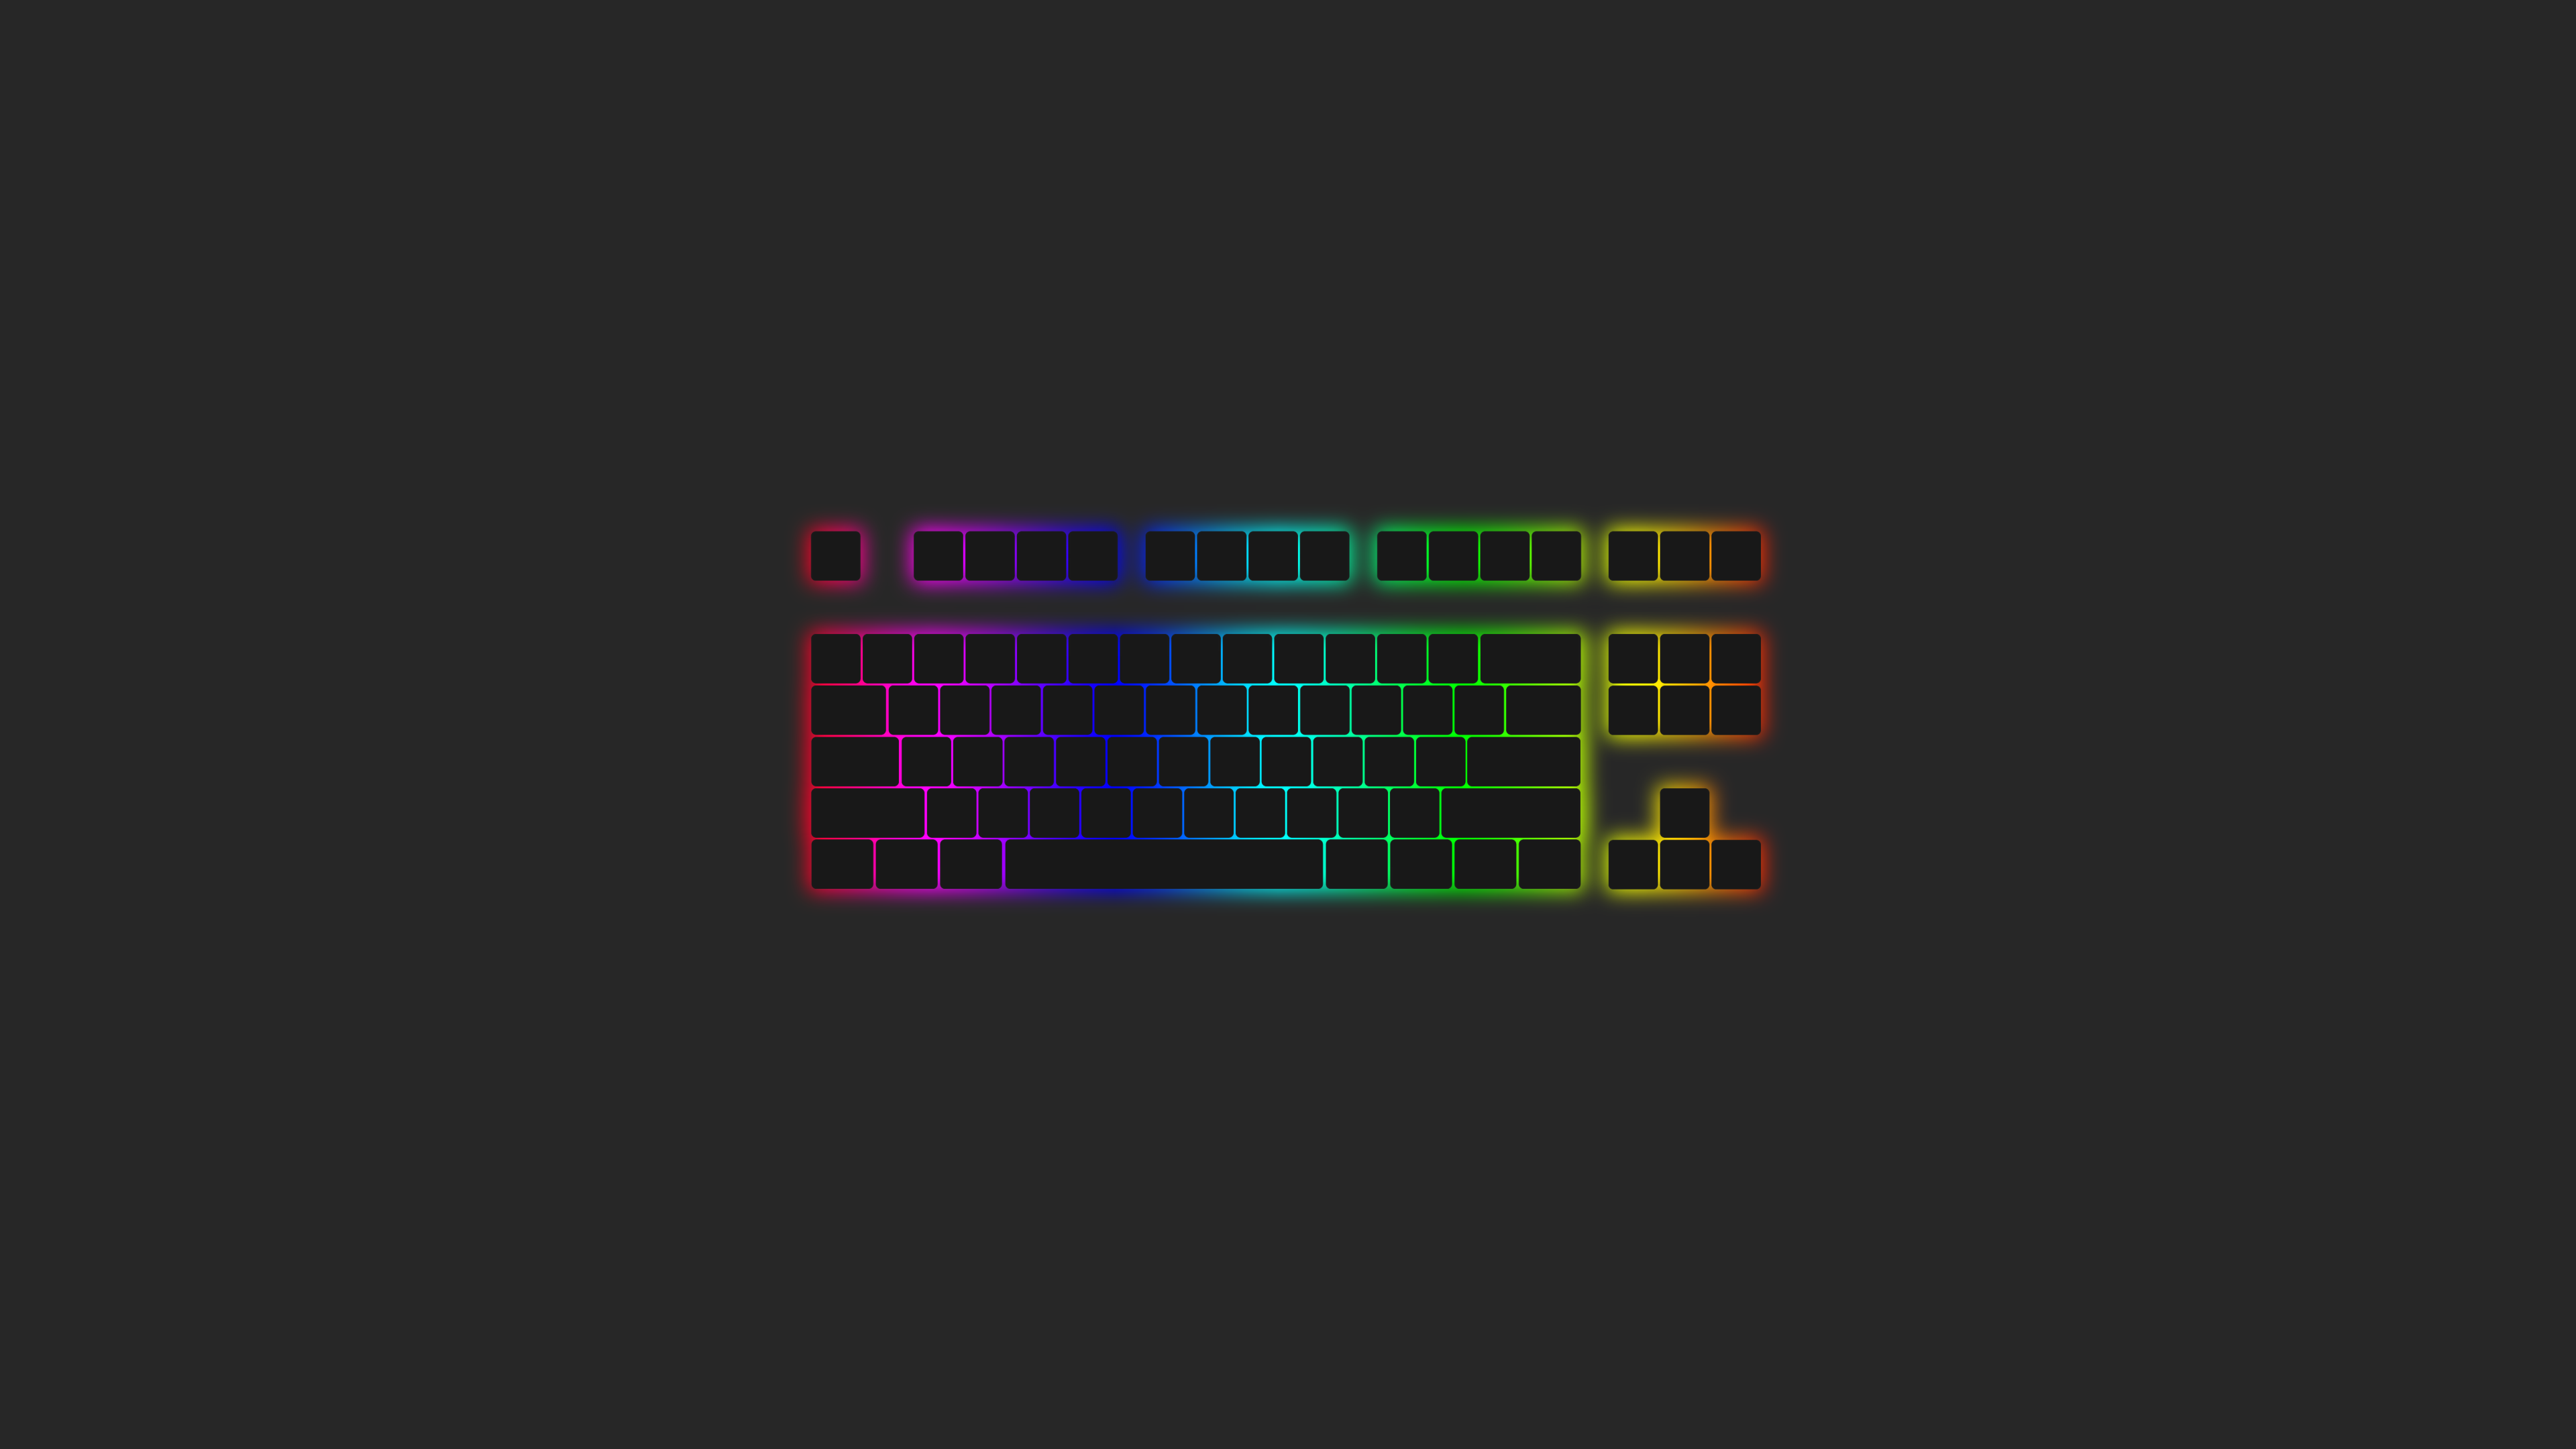 Keyboard 4K wallpaper for your desktop or mobile screen free and easy to download